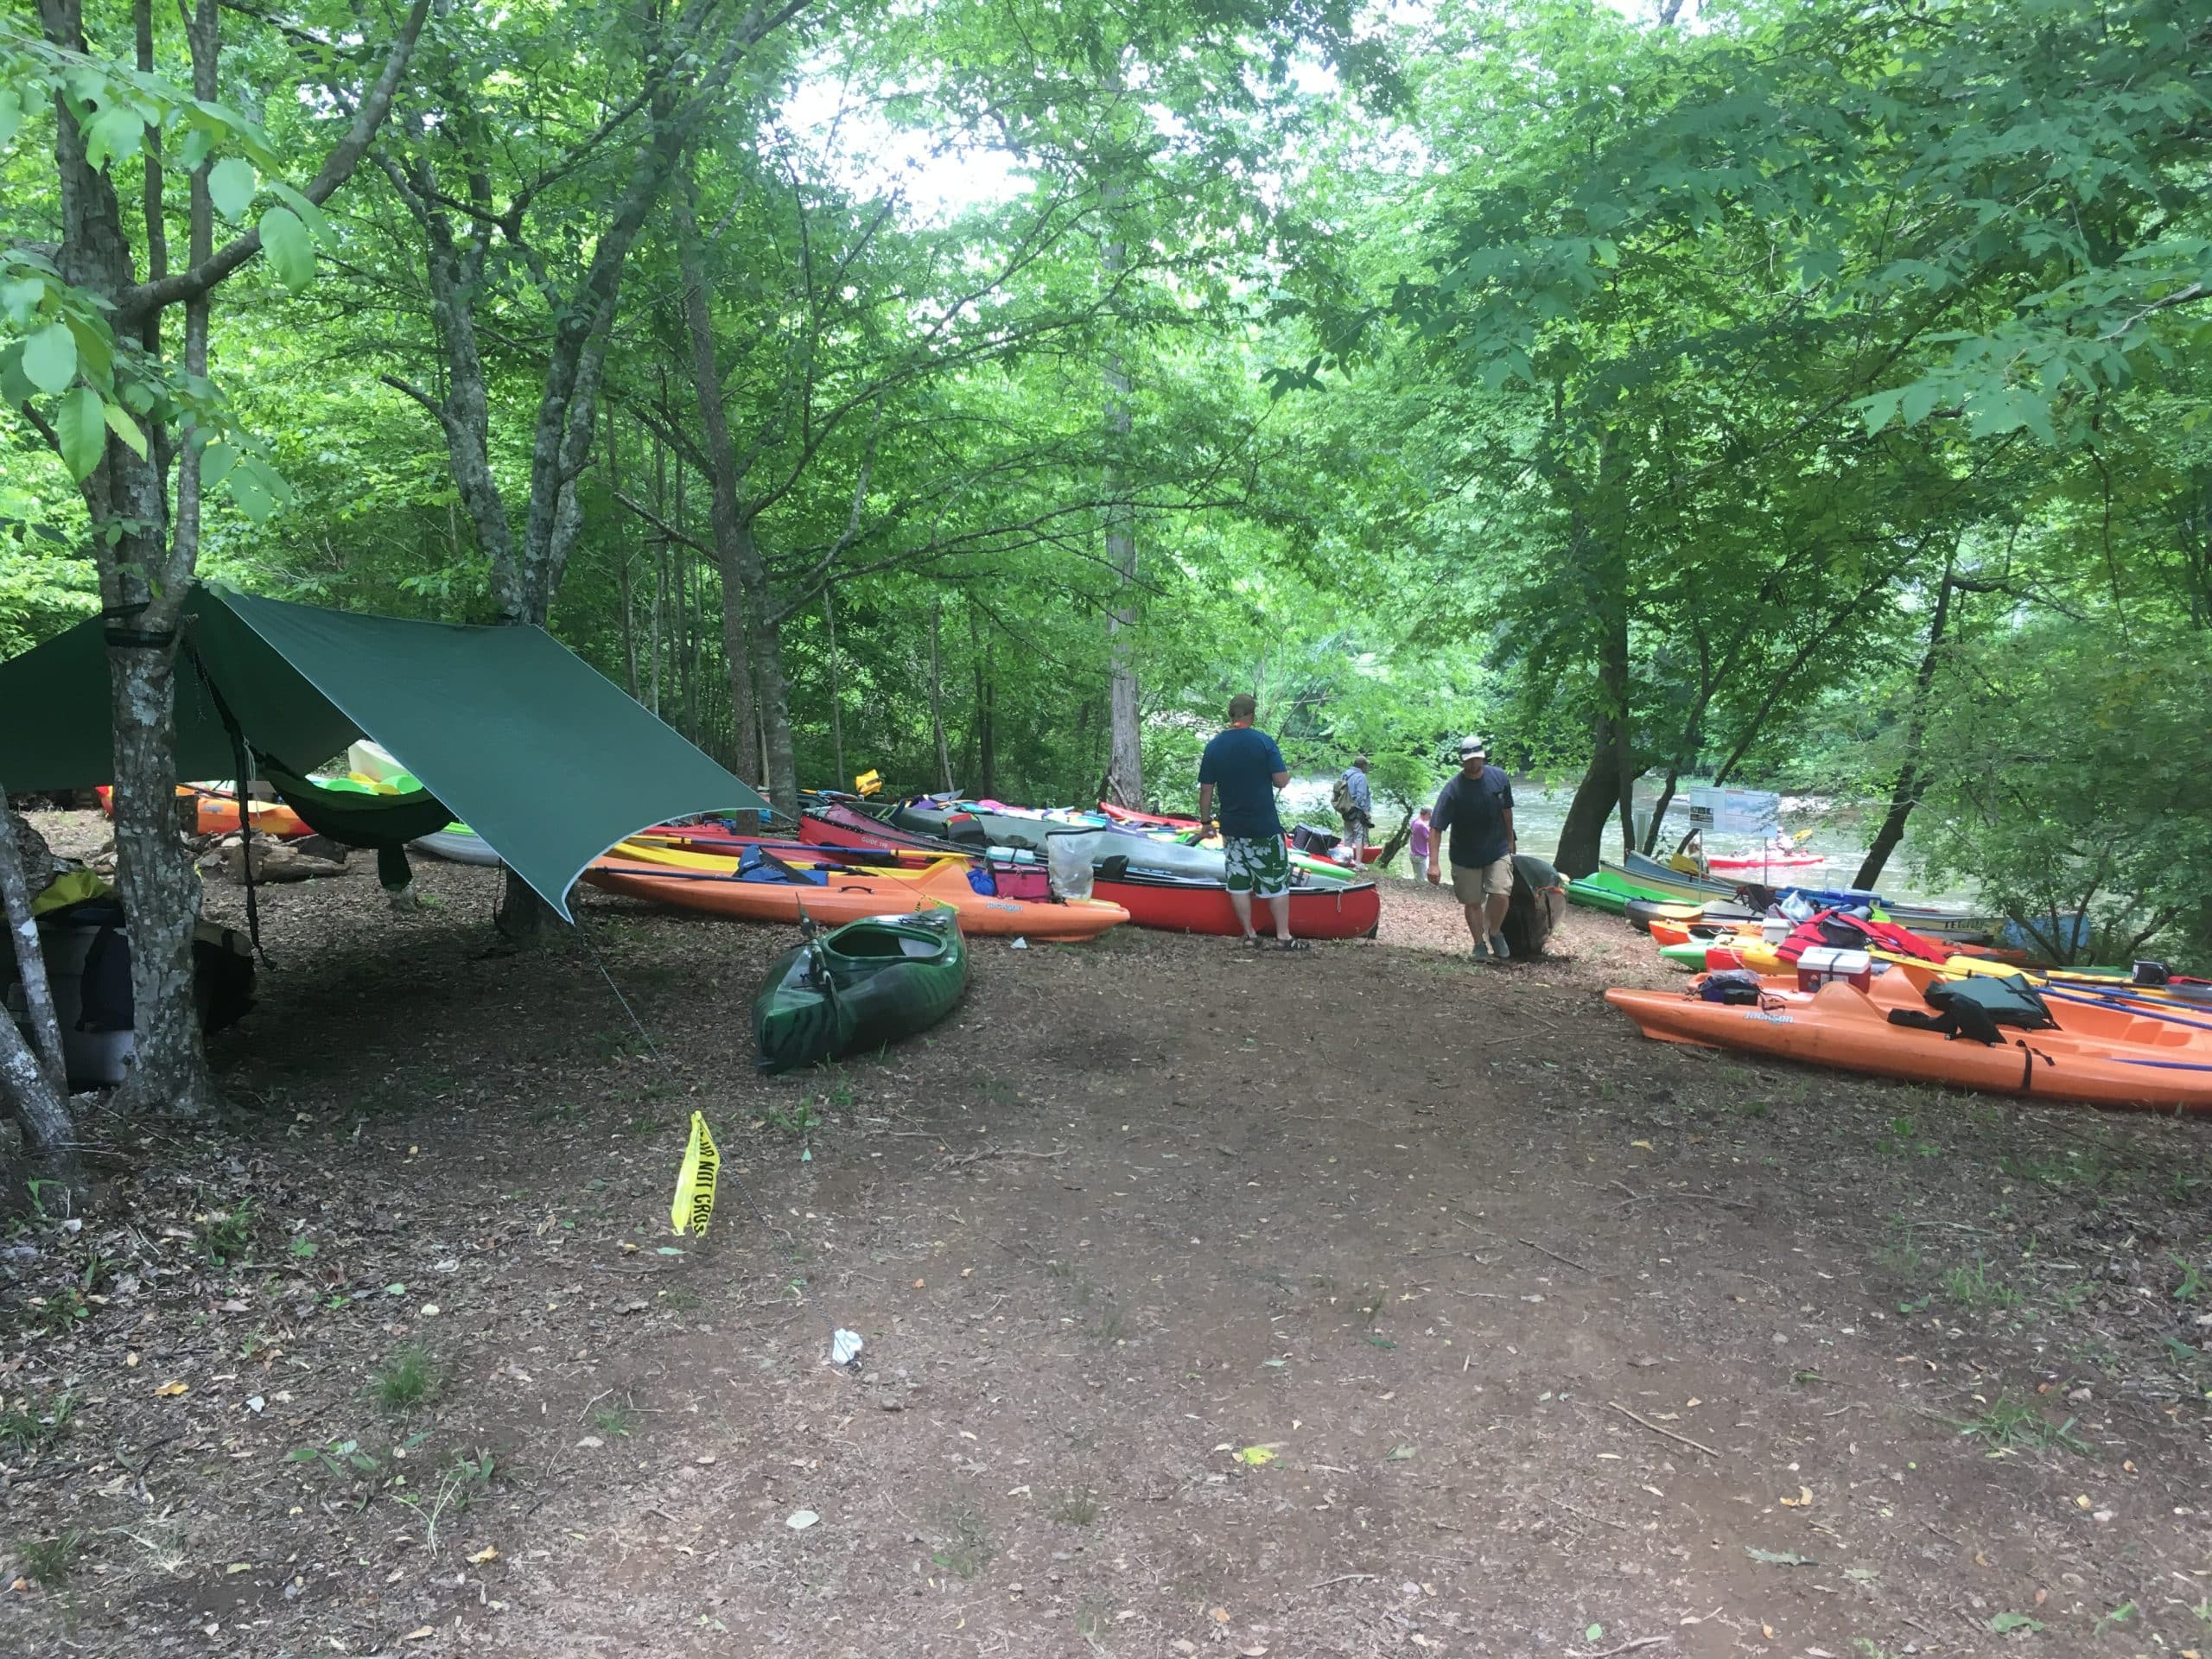 Kayakers setting up camp near a river